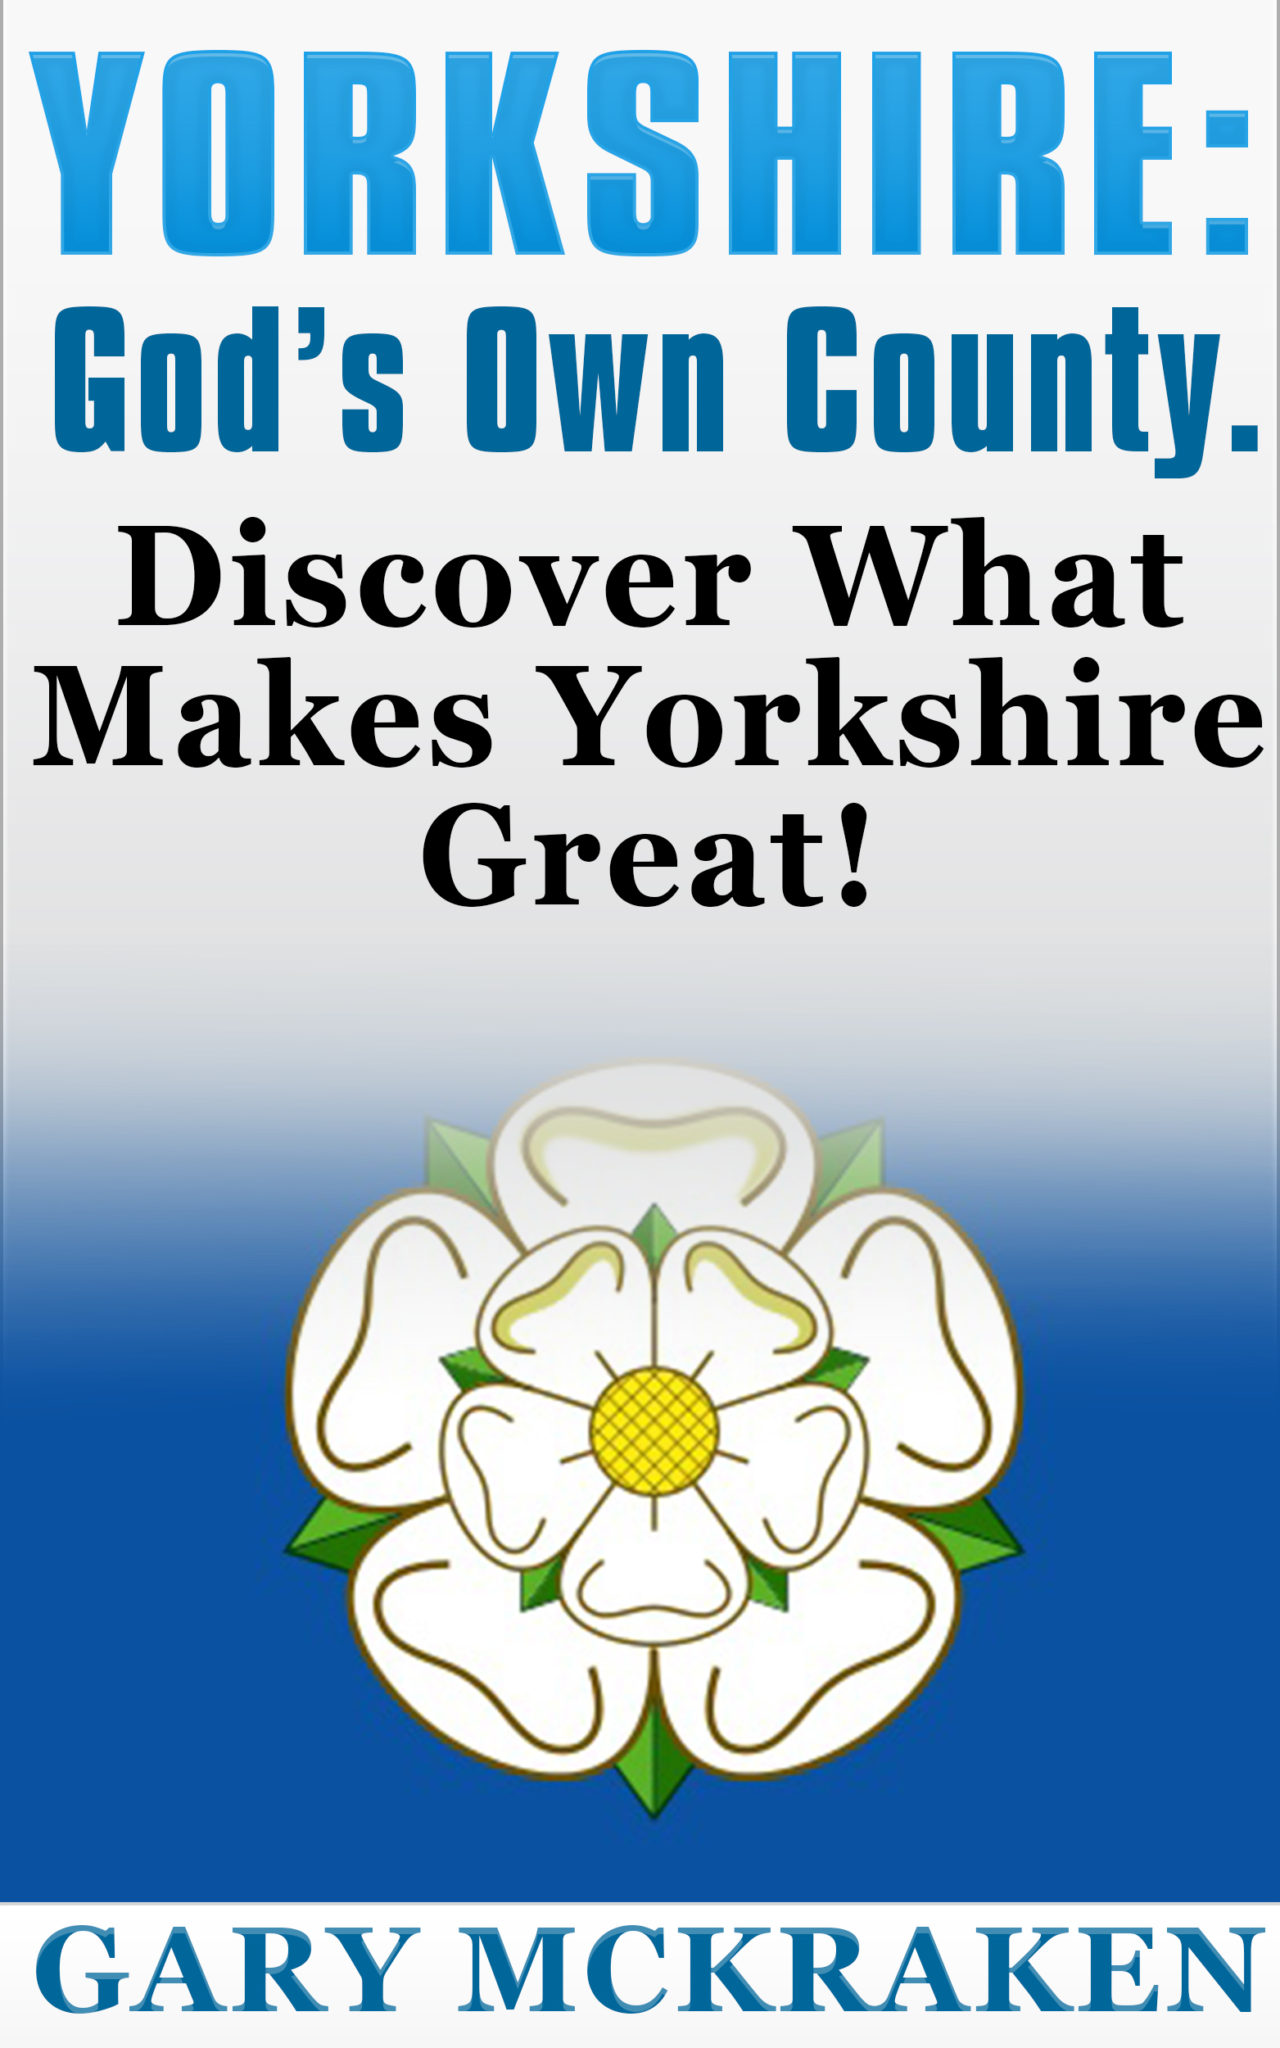 FREE: Yorkshire: God’s Own County. Discover What Makes Yorkshire Great! by Gary McKraken